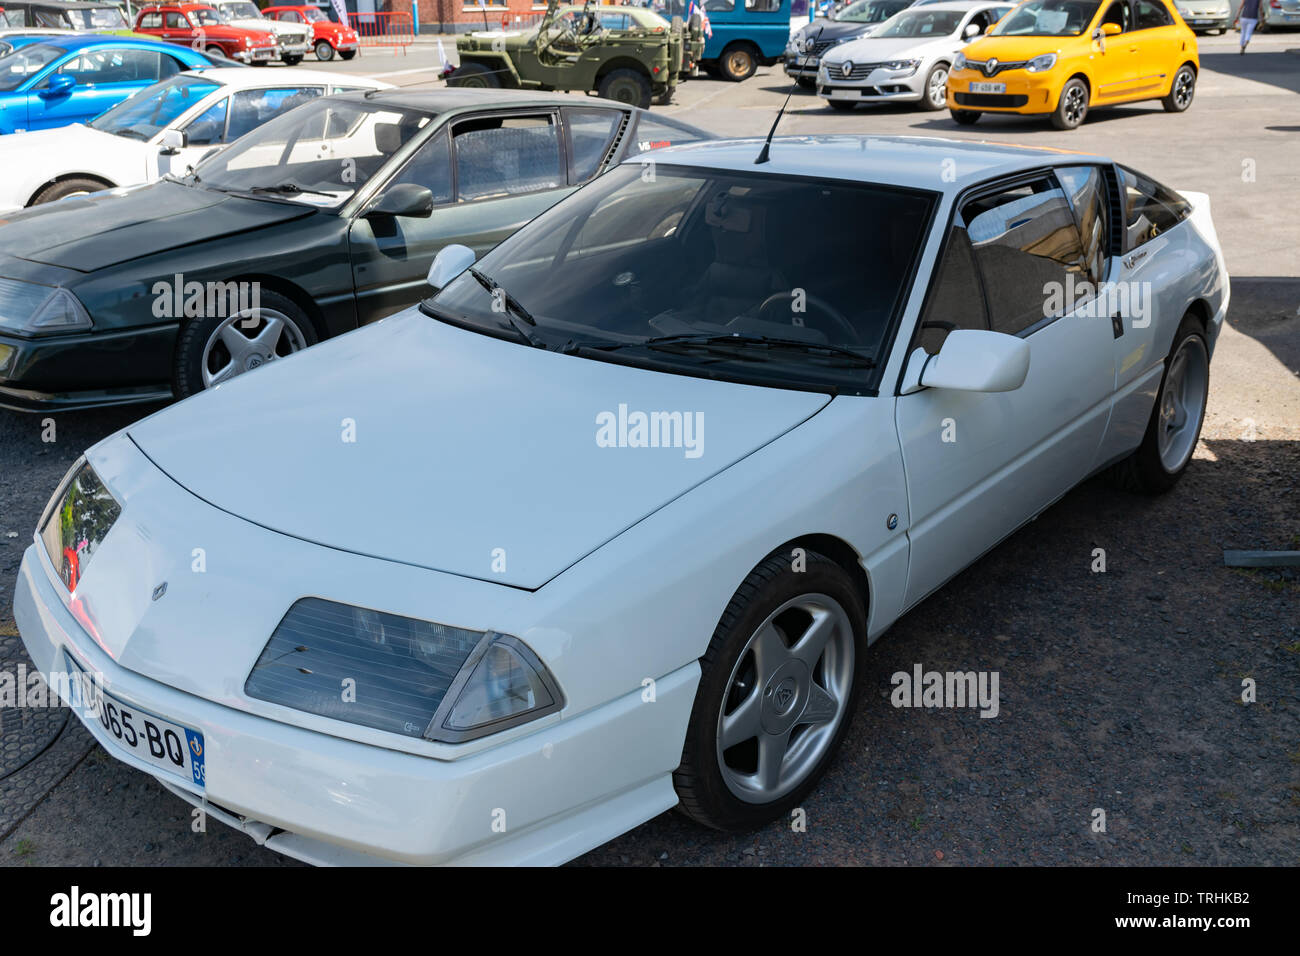 Wattrelos,FRANCE-June 02,2019: Renault Alpine A310,car exhibited at the 7th Retro Car Festival at the Renault Wattrelos ZI Martinoire parking lot. Stock Photo